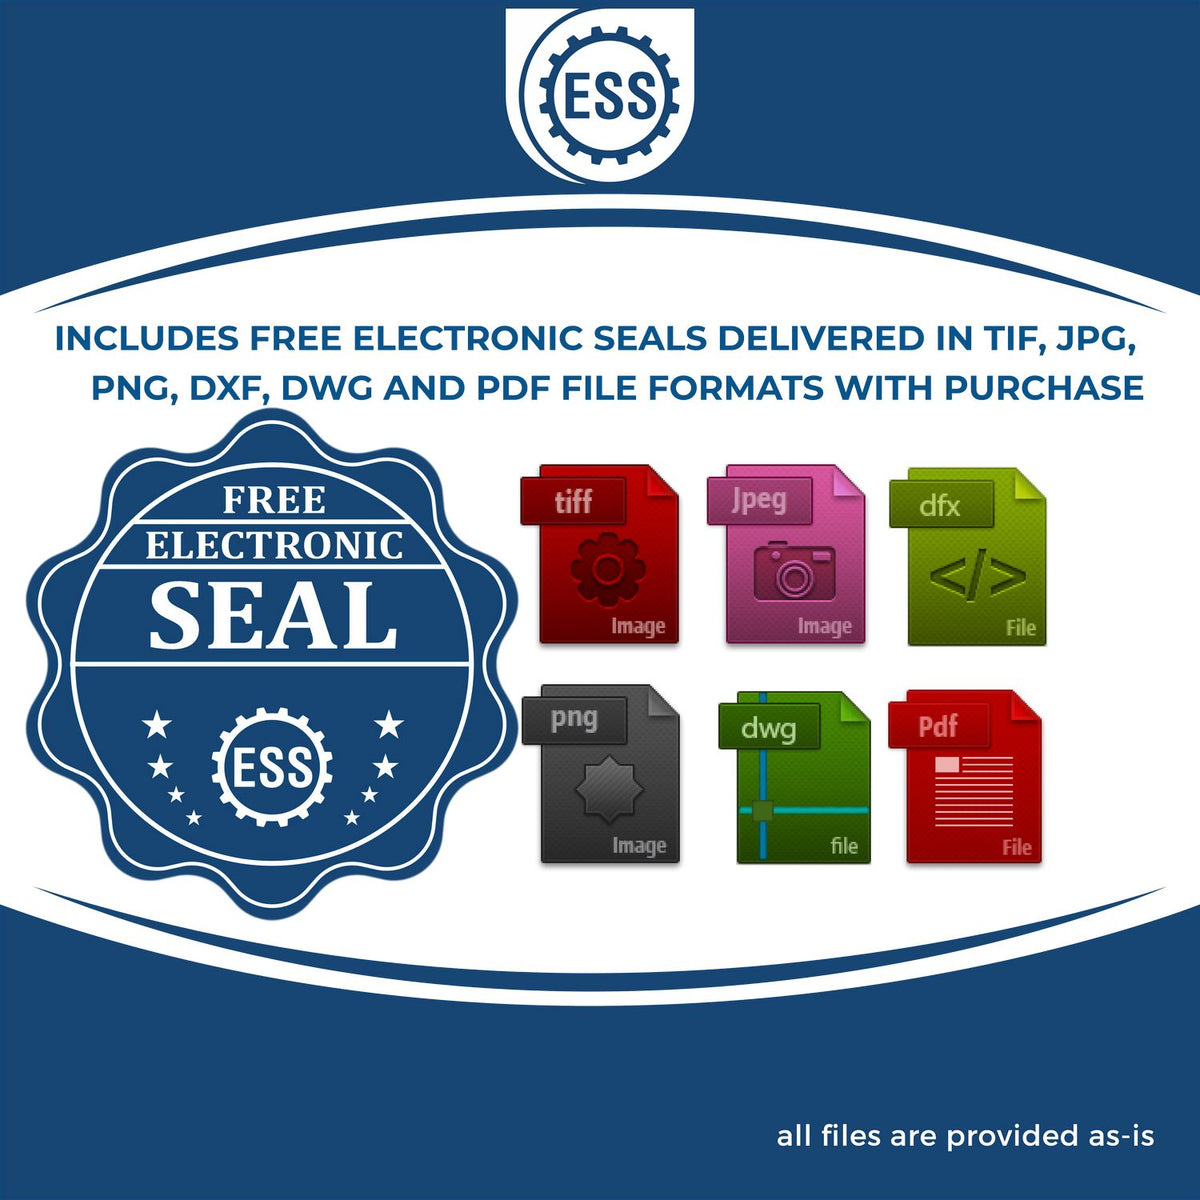 An infographic for the free electronic seal for the Self-Inking Arizona Geologist Stamp illustrating the different file type icons such as DXF, DWG, TIF, JPG and PNG.